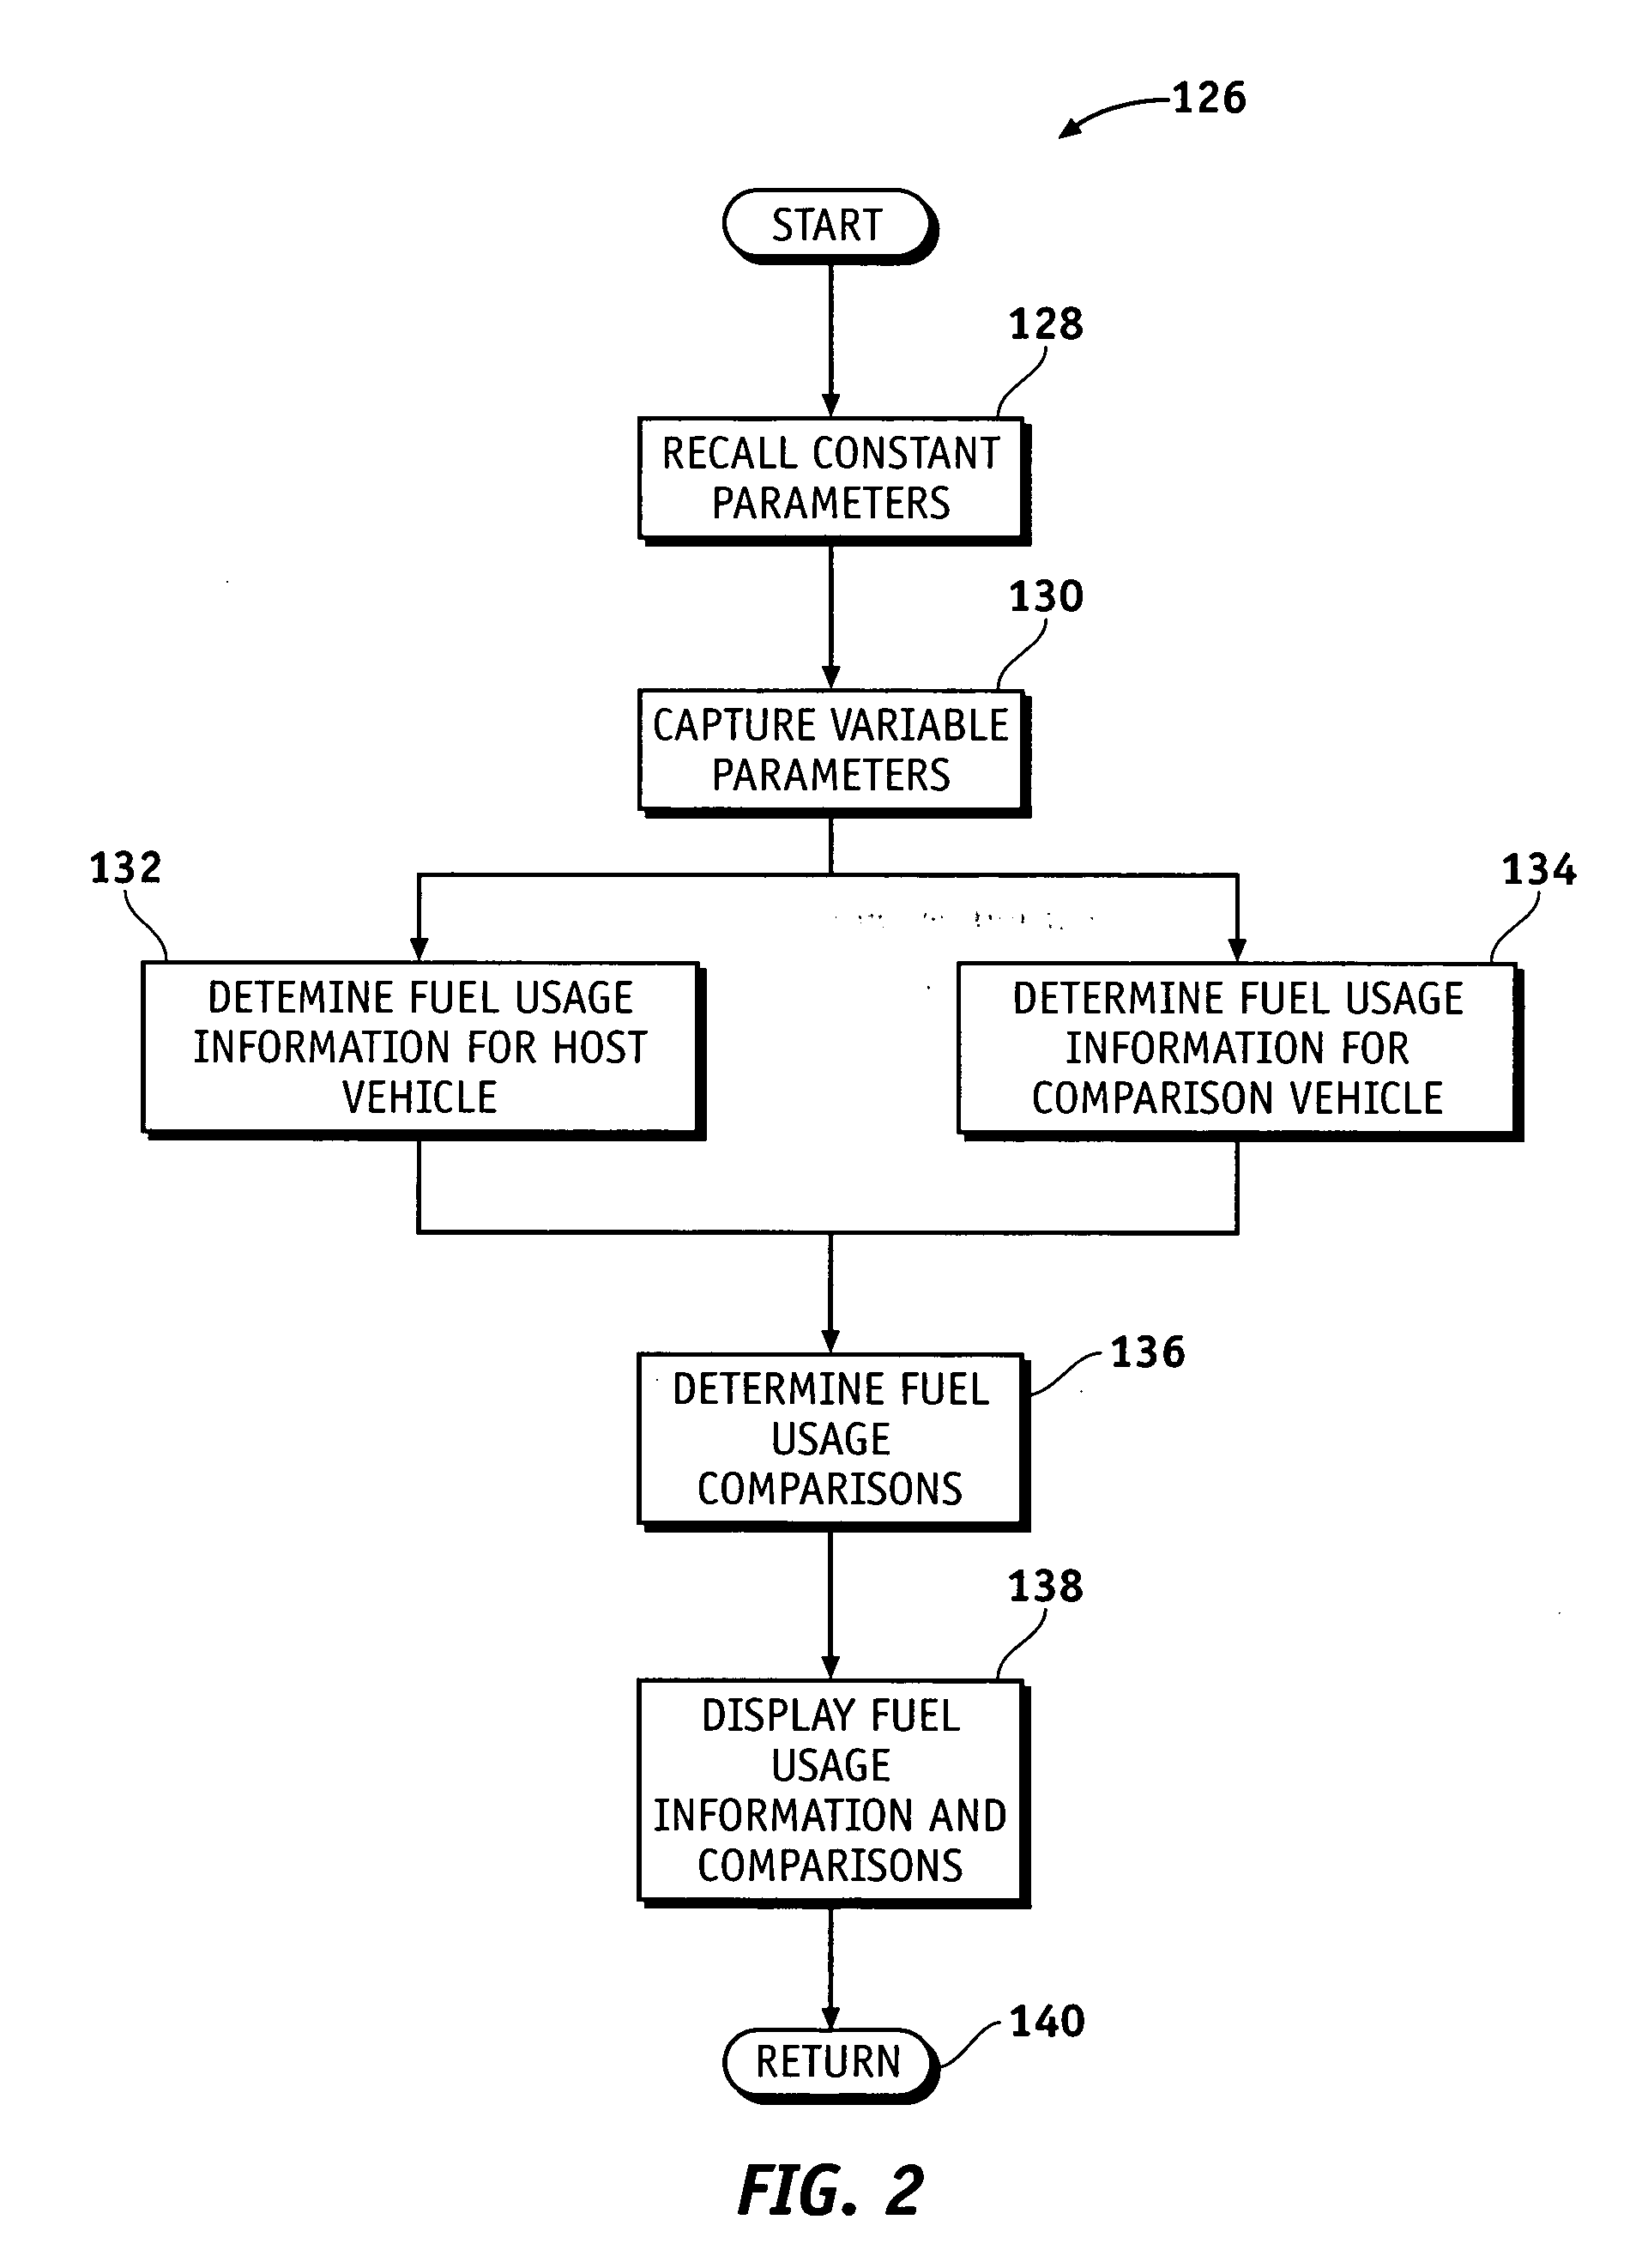 Apparatus and method for comparing the fuel consumption of an alternative fuel vehicle with that of a traditionally fueled comparison vehicle